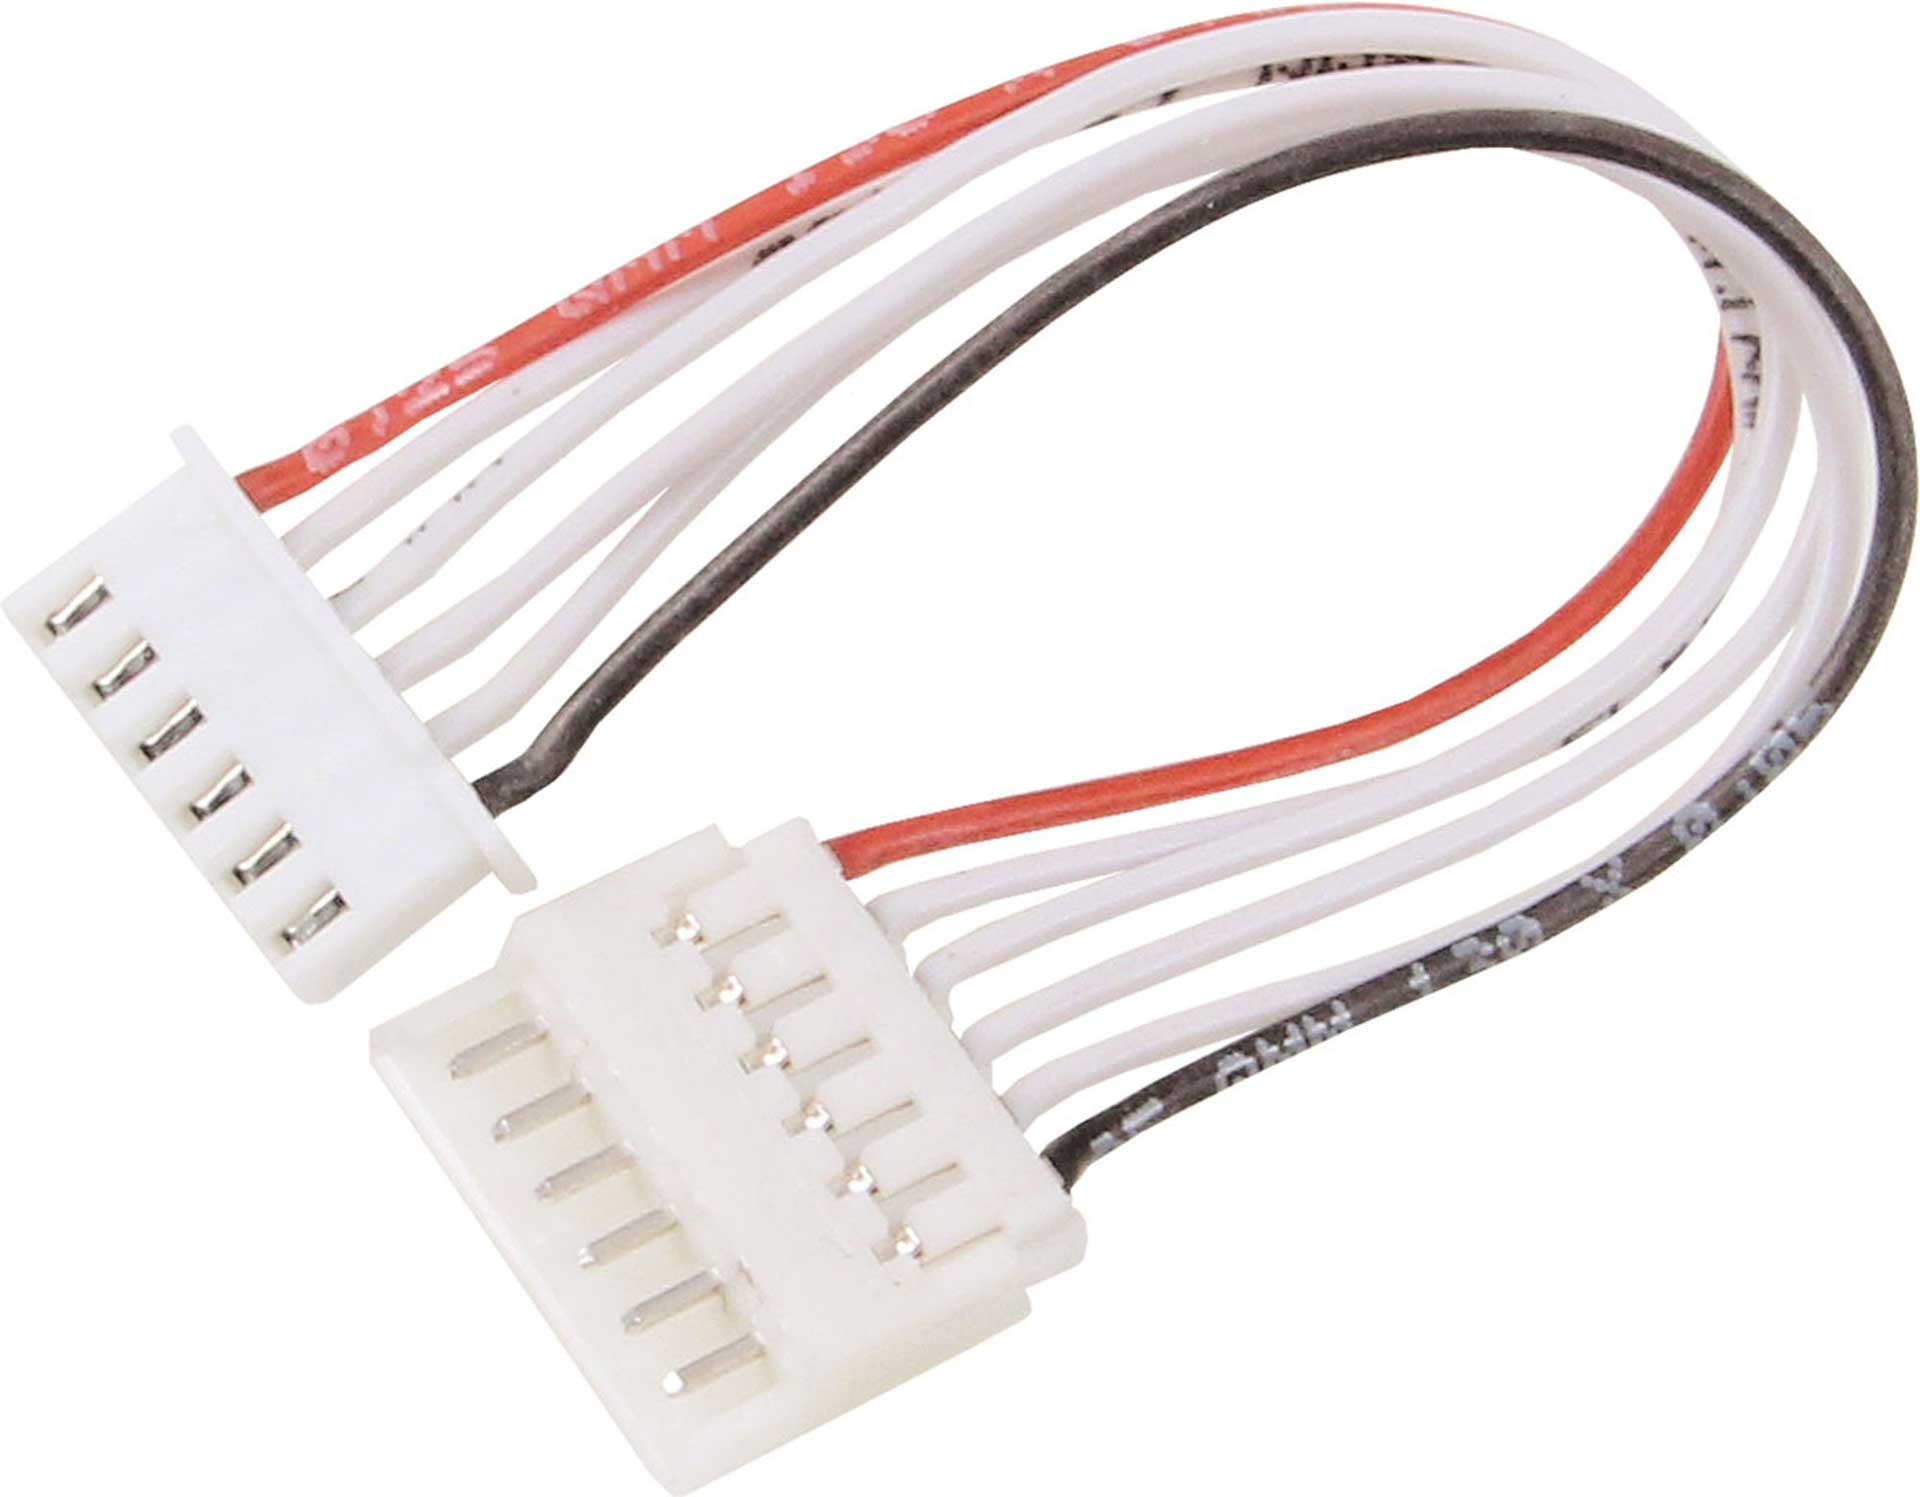 MULDENTAL SENSOR ADAPTER CABLE EH TO XH 5S SILICONE, 10CM, 6-PIN, 0,25QMM, 1PCS.